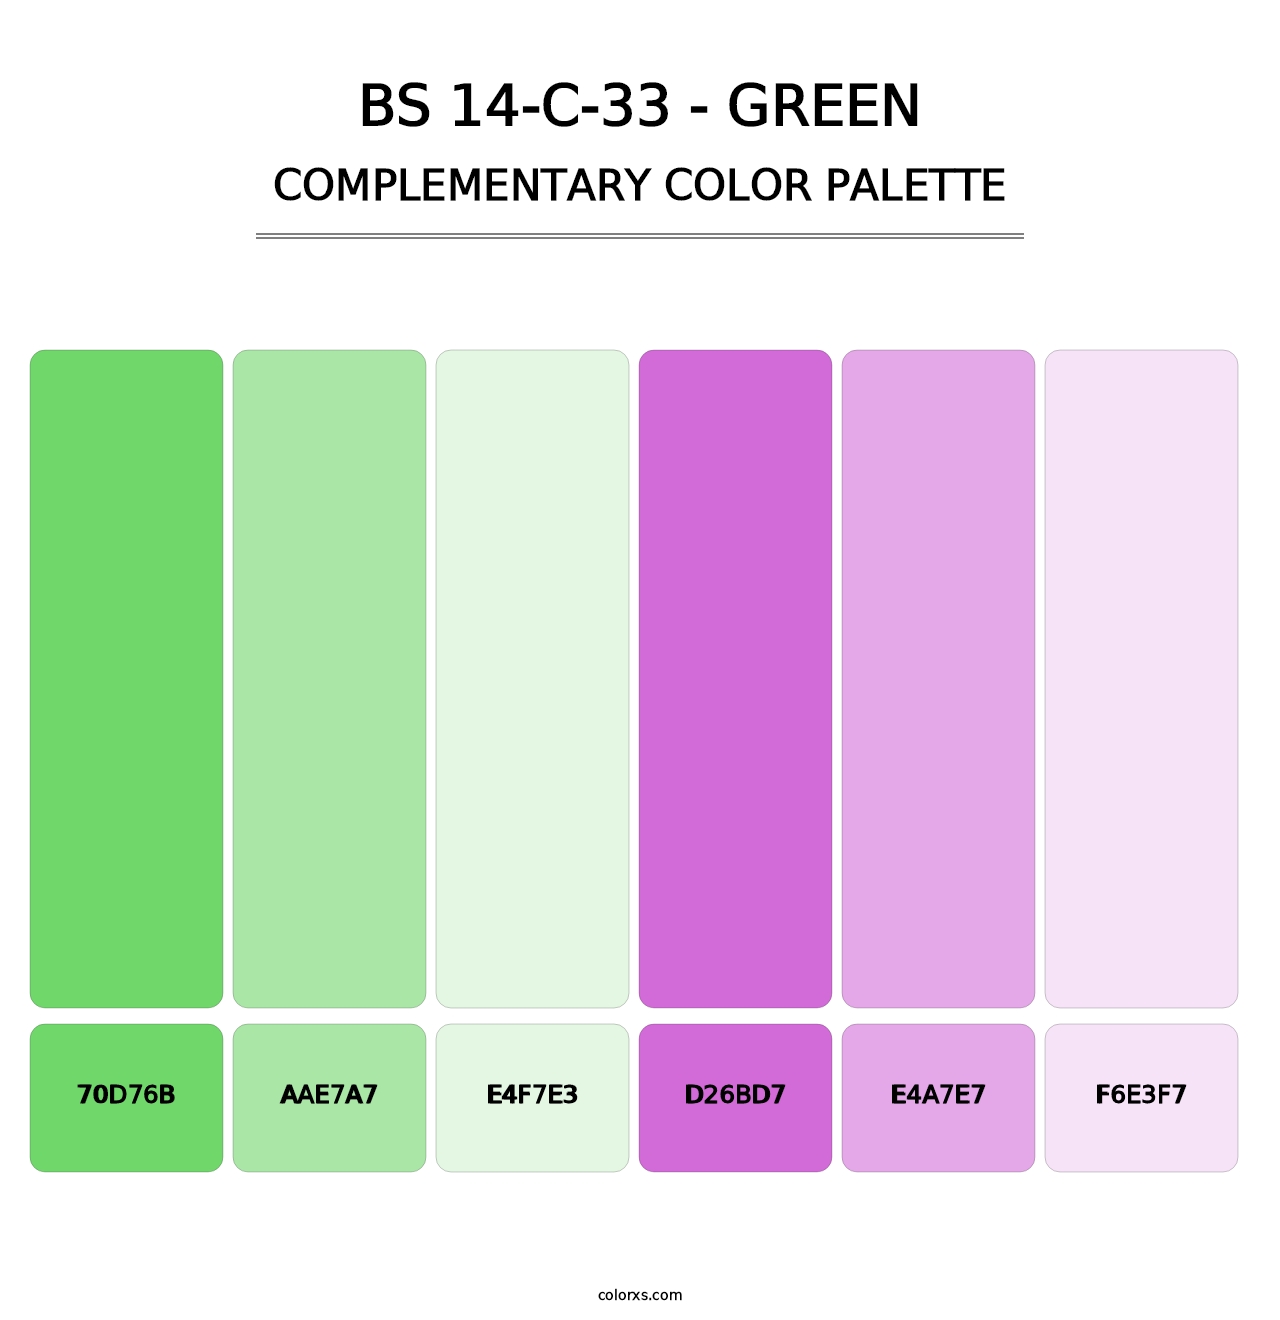 BS 14-C-33 - Green - Complementary Color Palette